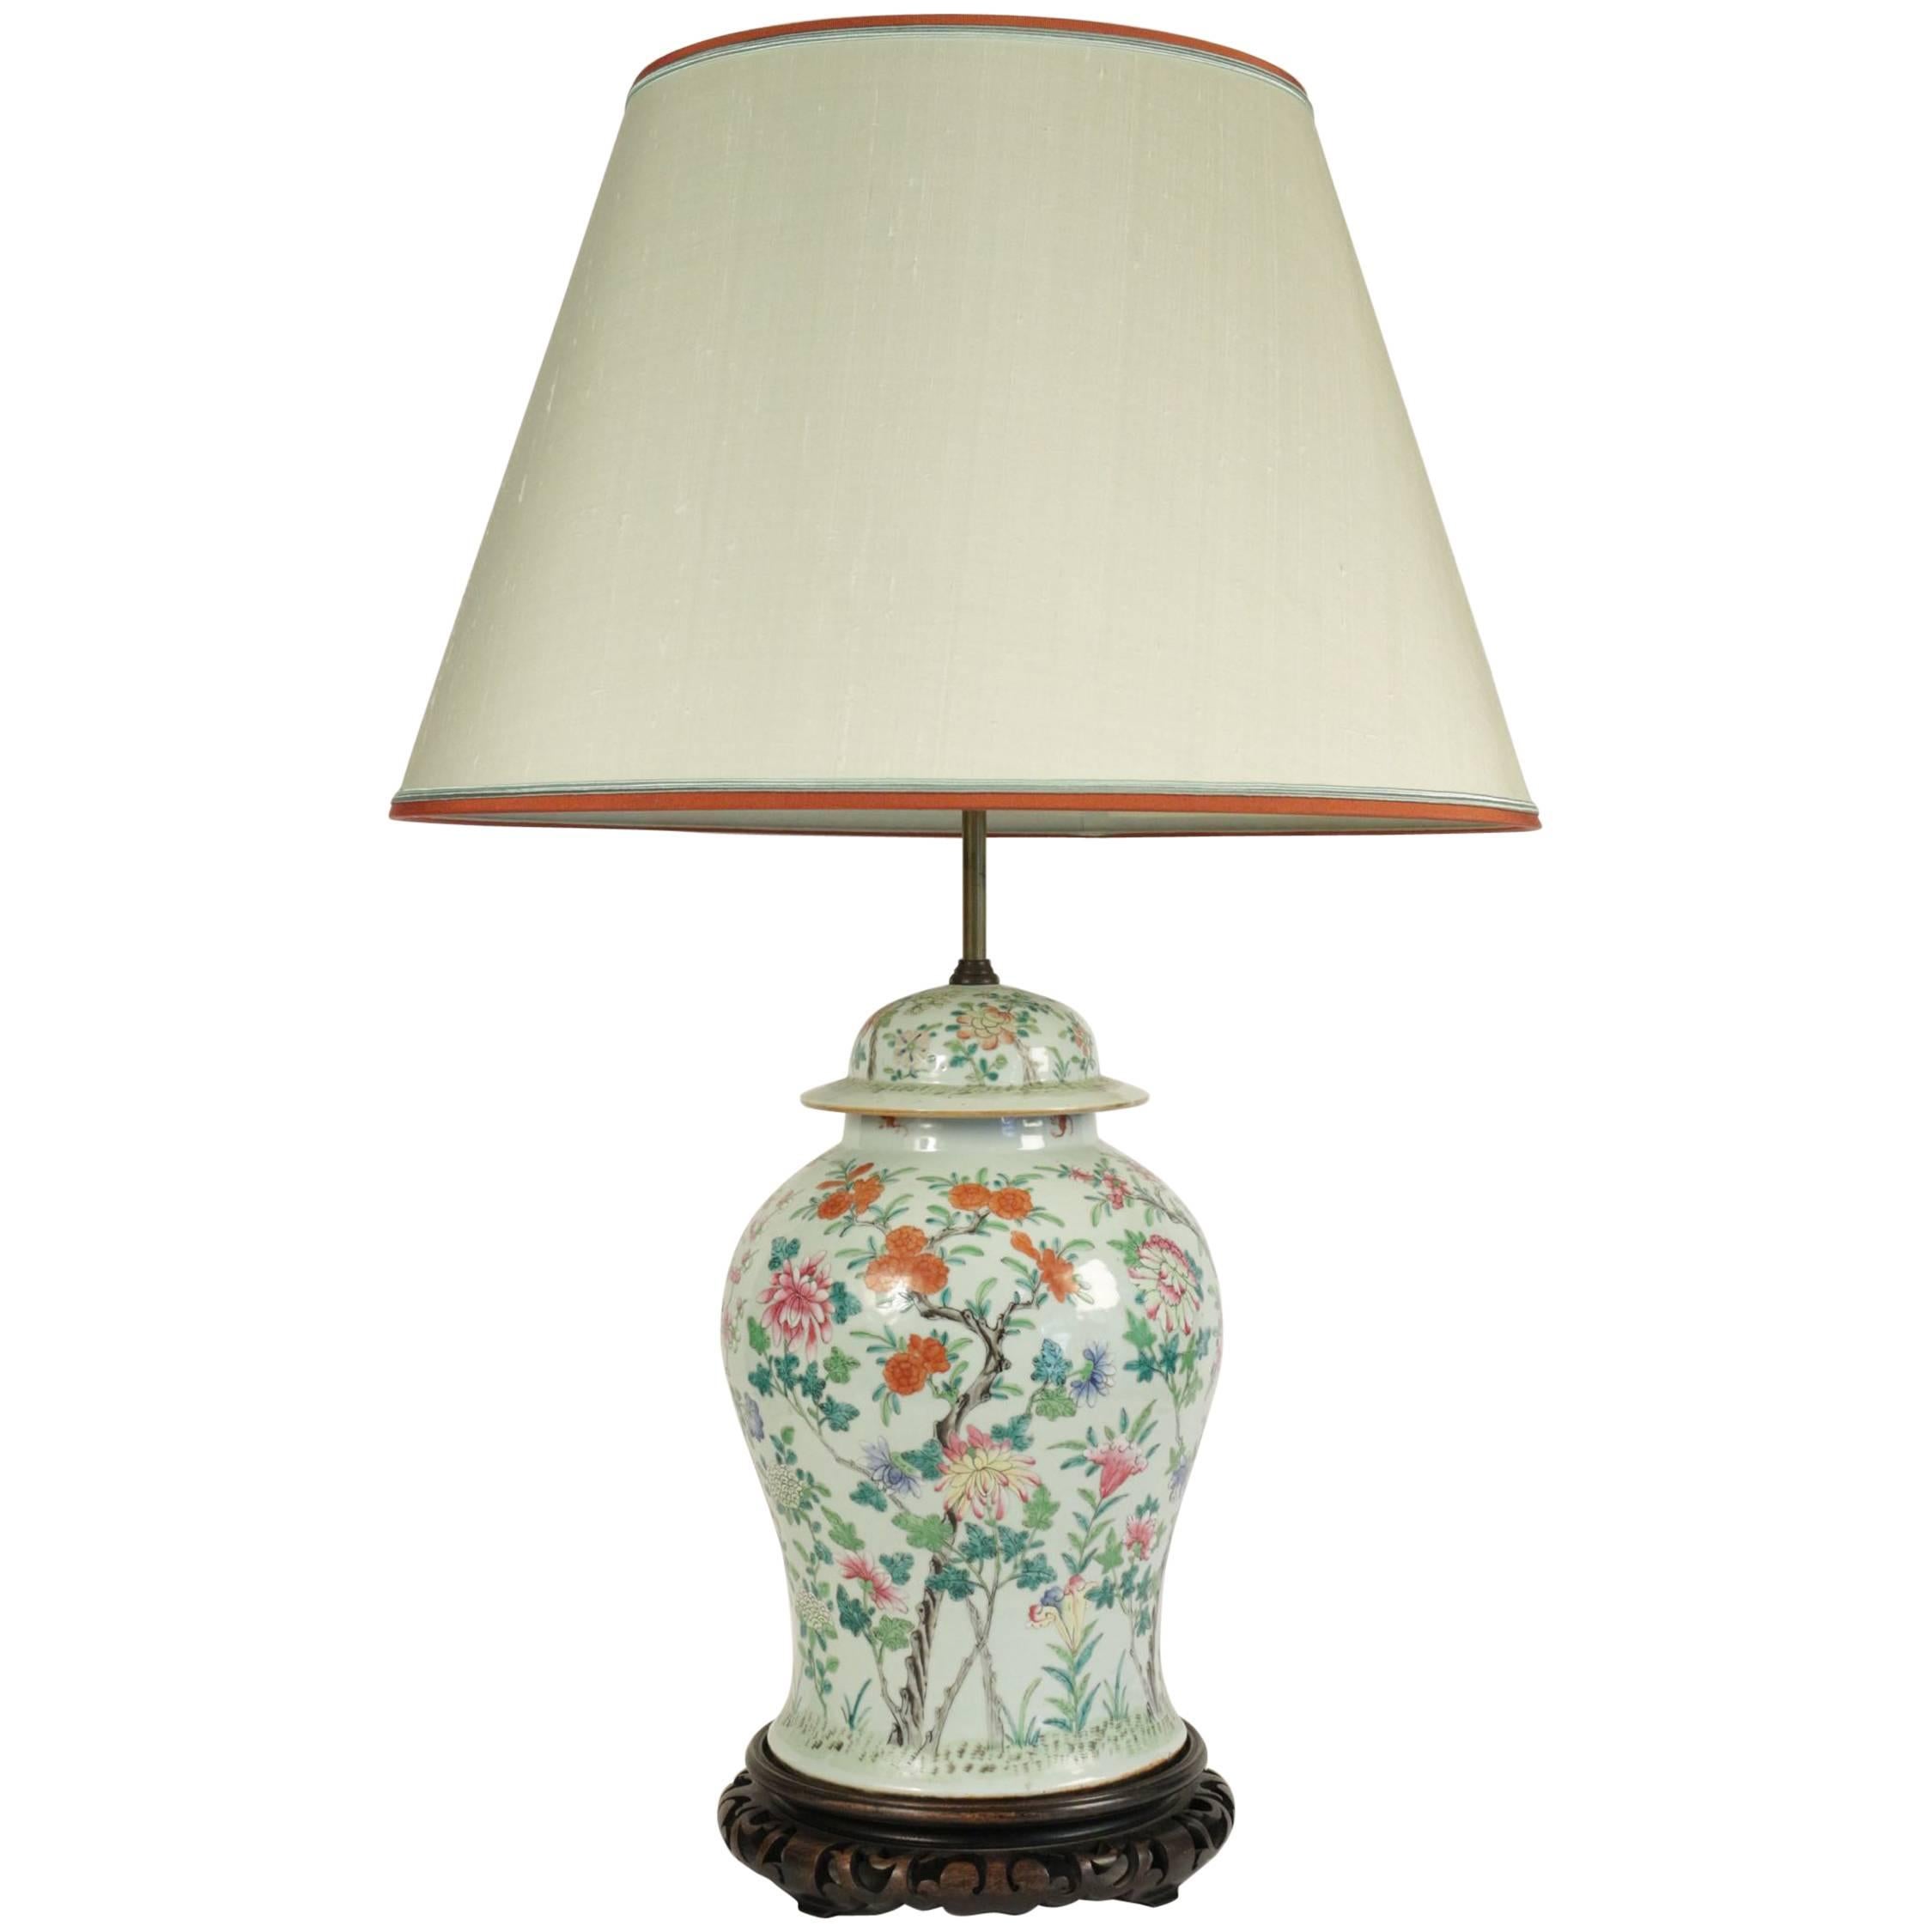 Important Chinese Porcelain Lamp, circa 1890-1900 